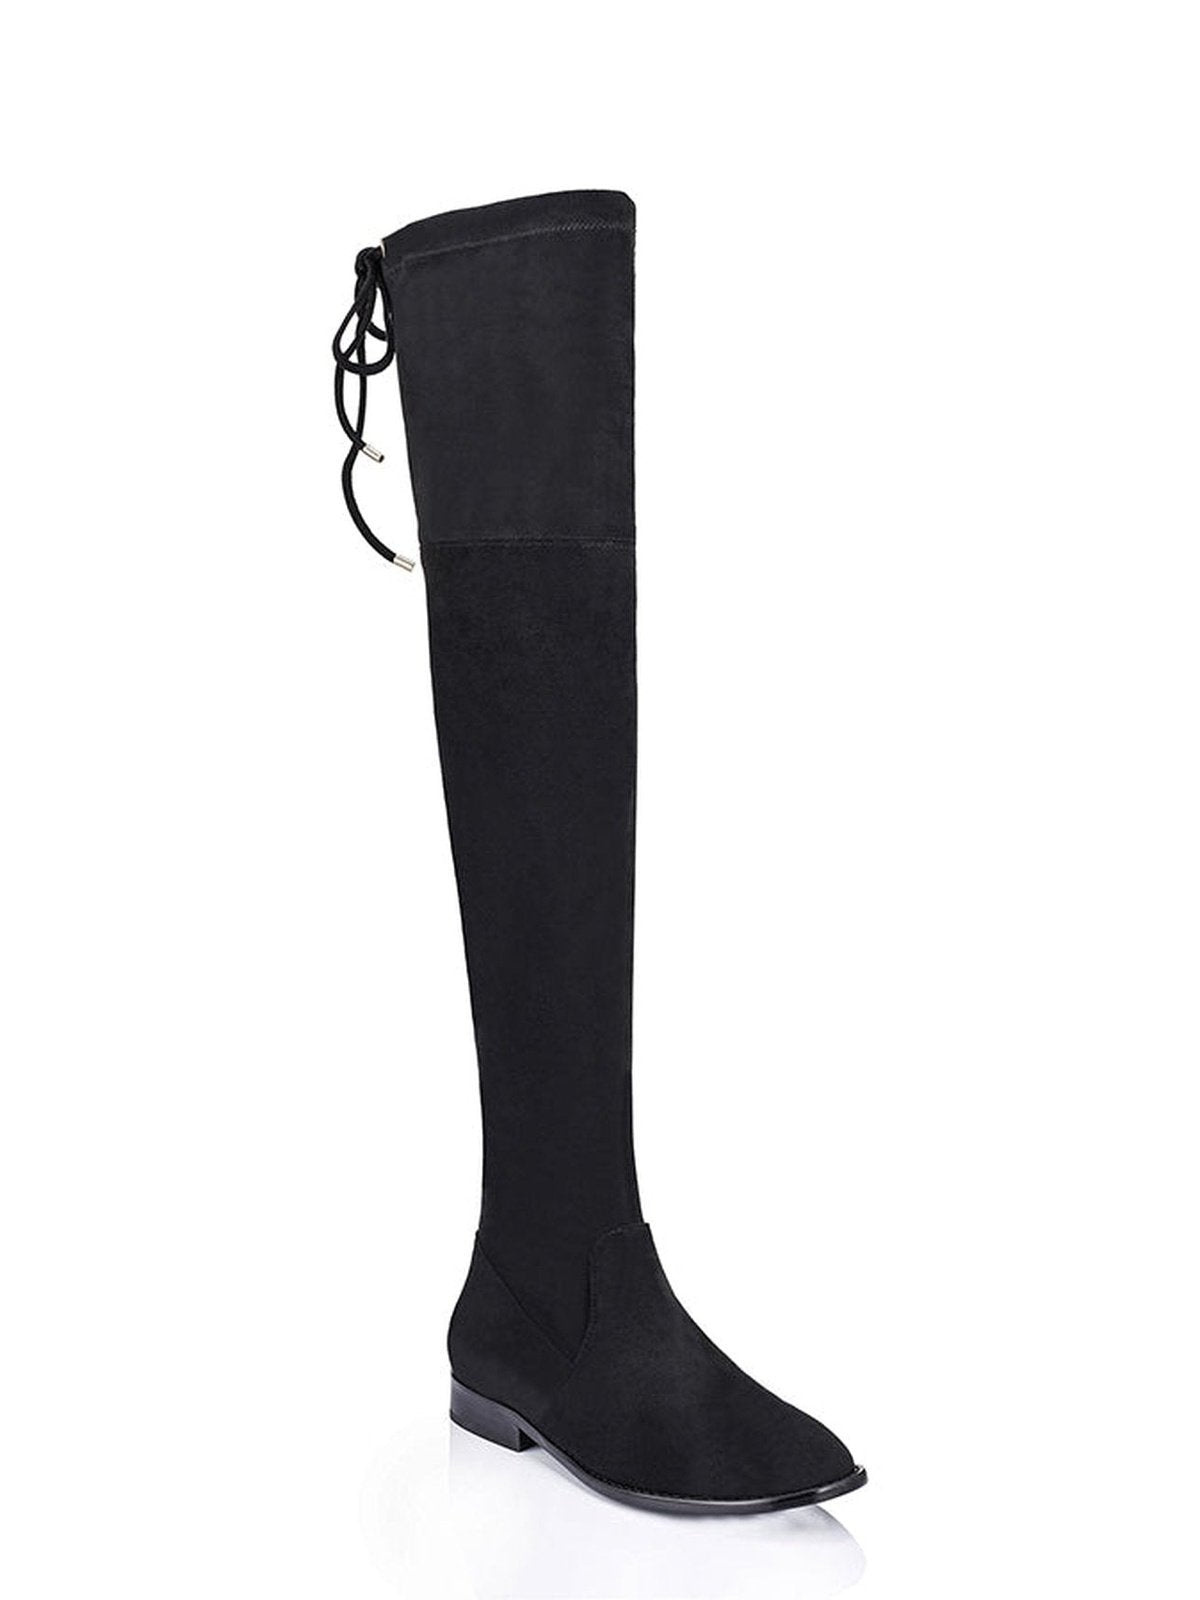 Quest Black Microsuede Over The Knee Boots | Siren Shoes